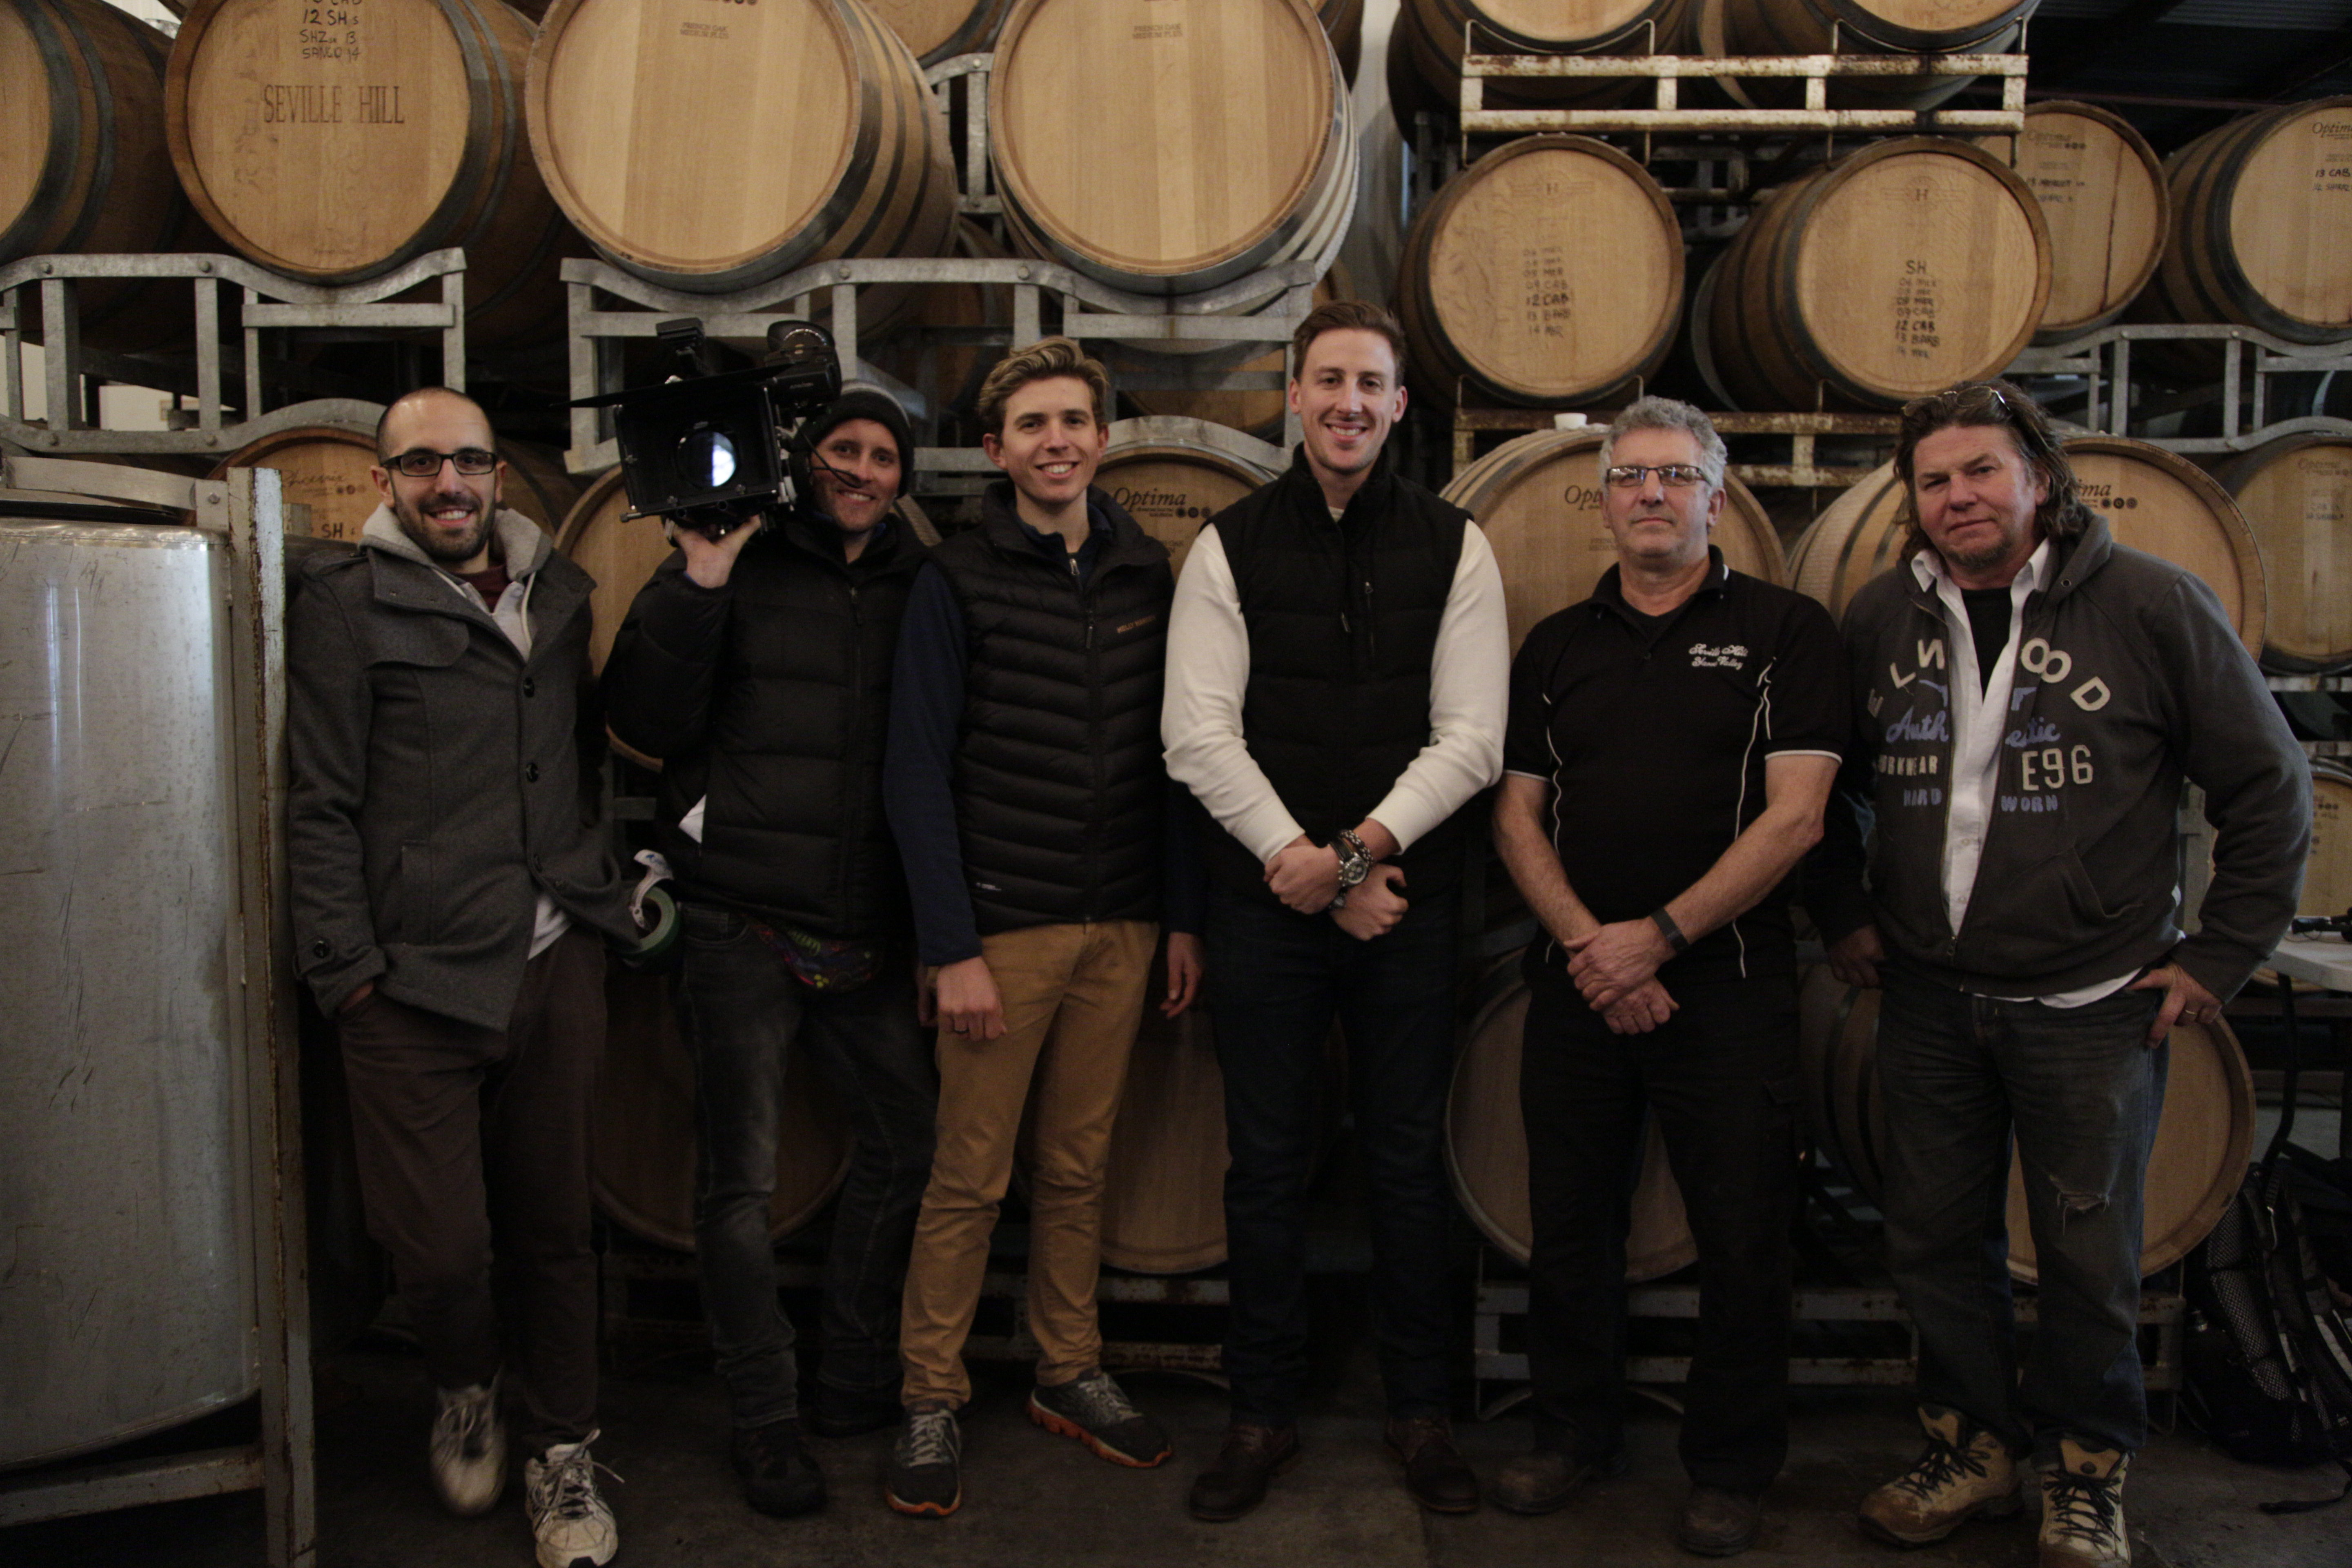 Blake Borcich on-set 'Winery' (2015) Producer: Cameron Pinches